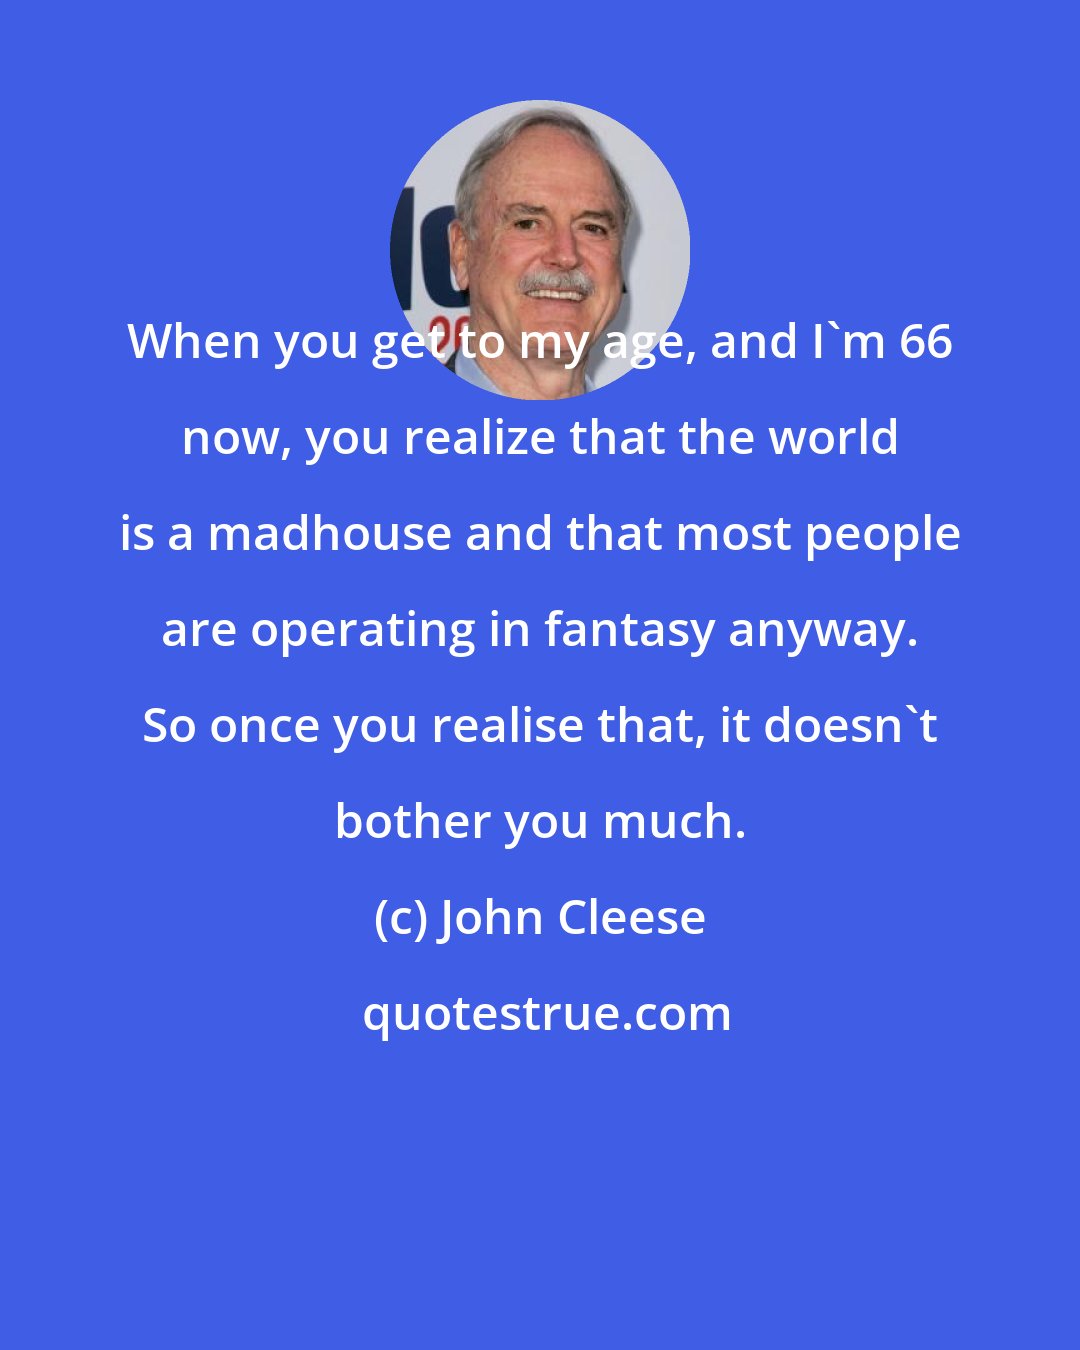 John Cleese: When you get to my age, and I'm 66 now, you realize that the world is a madhouse and that most people are operating in fantasy anyway. So once you realise that, it doesn't bother you much.